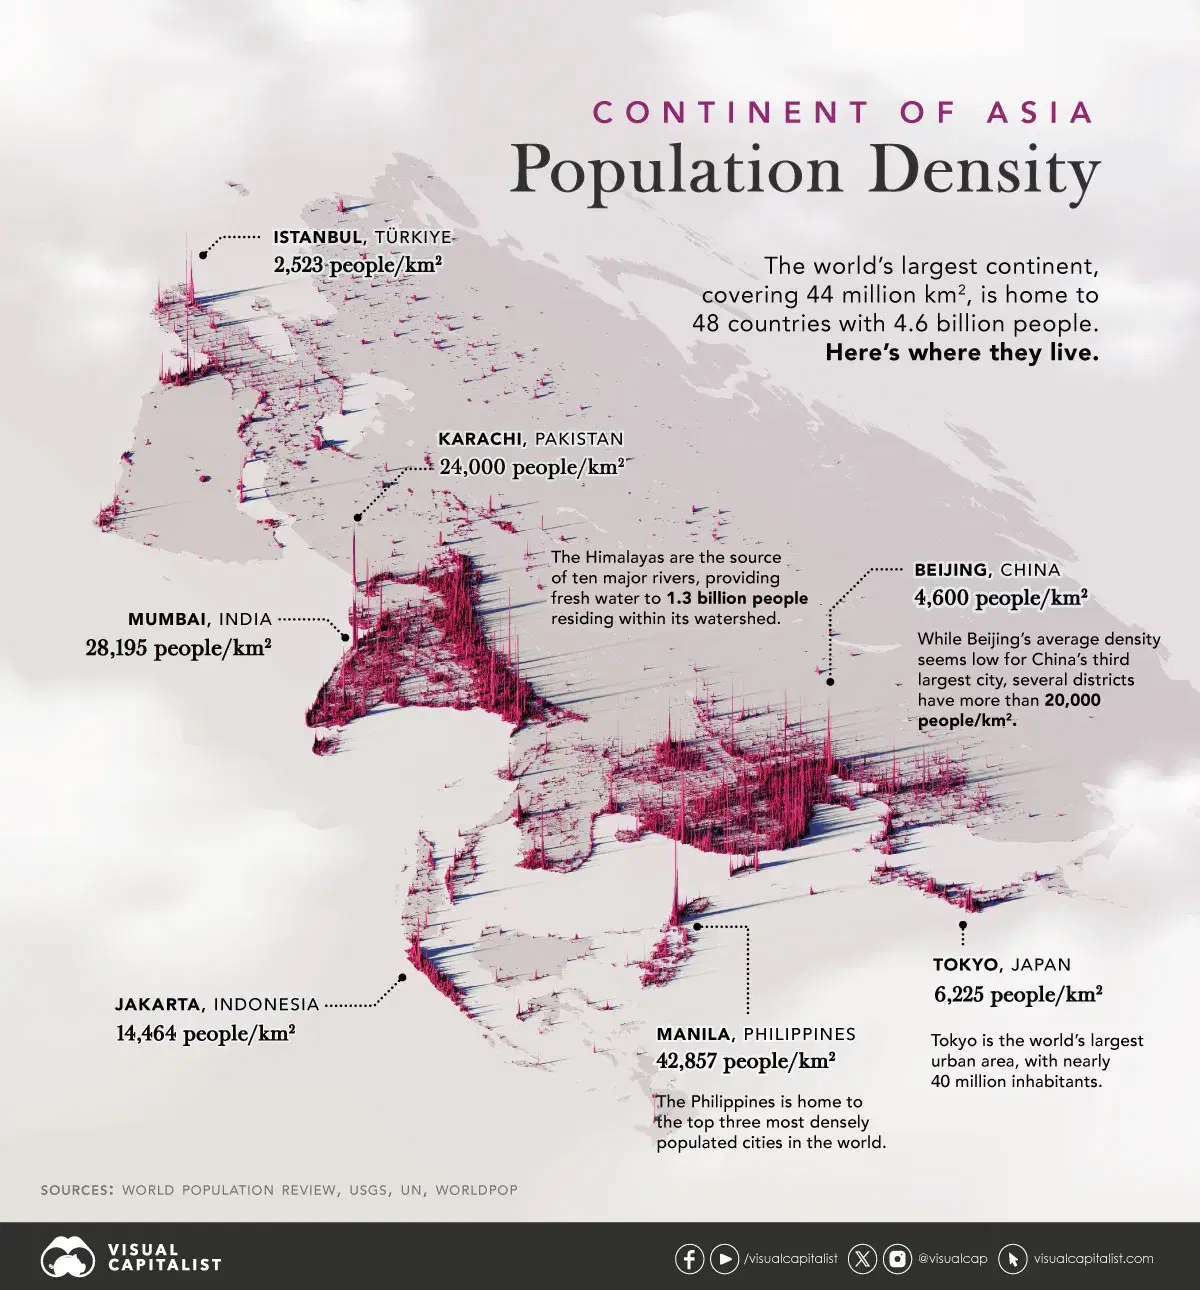 Mapped: Asia’s Population Patterns by Density